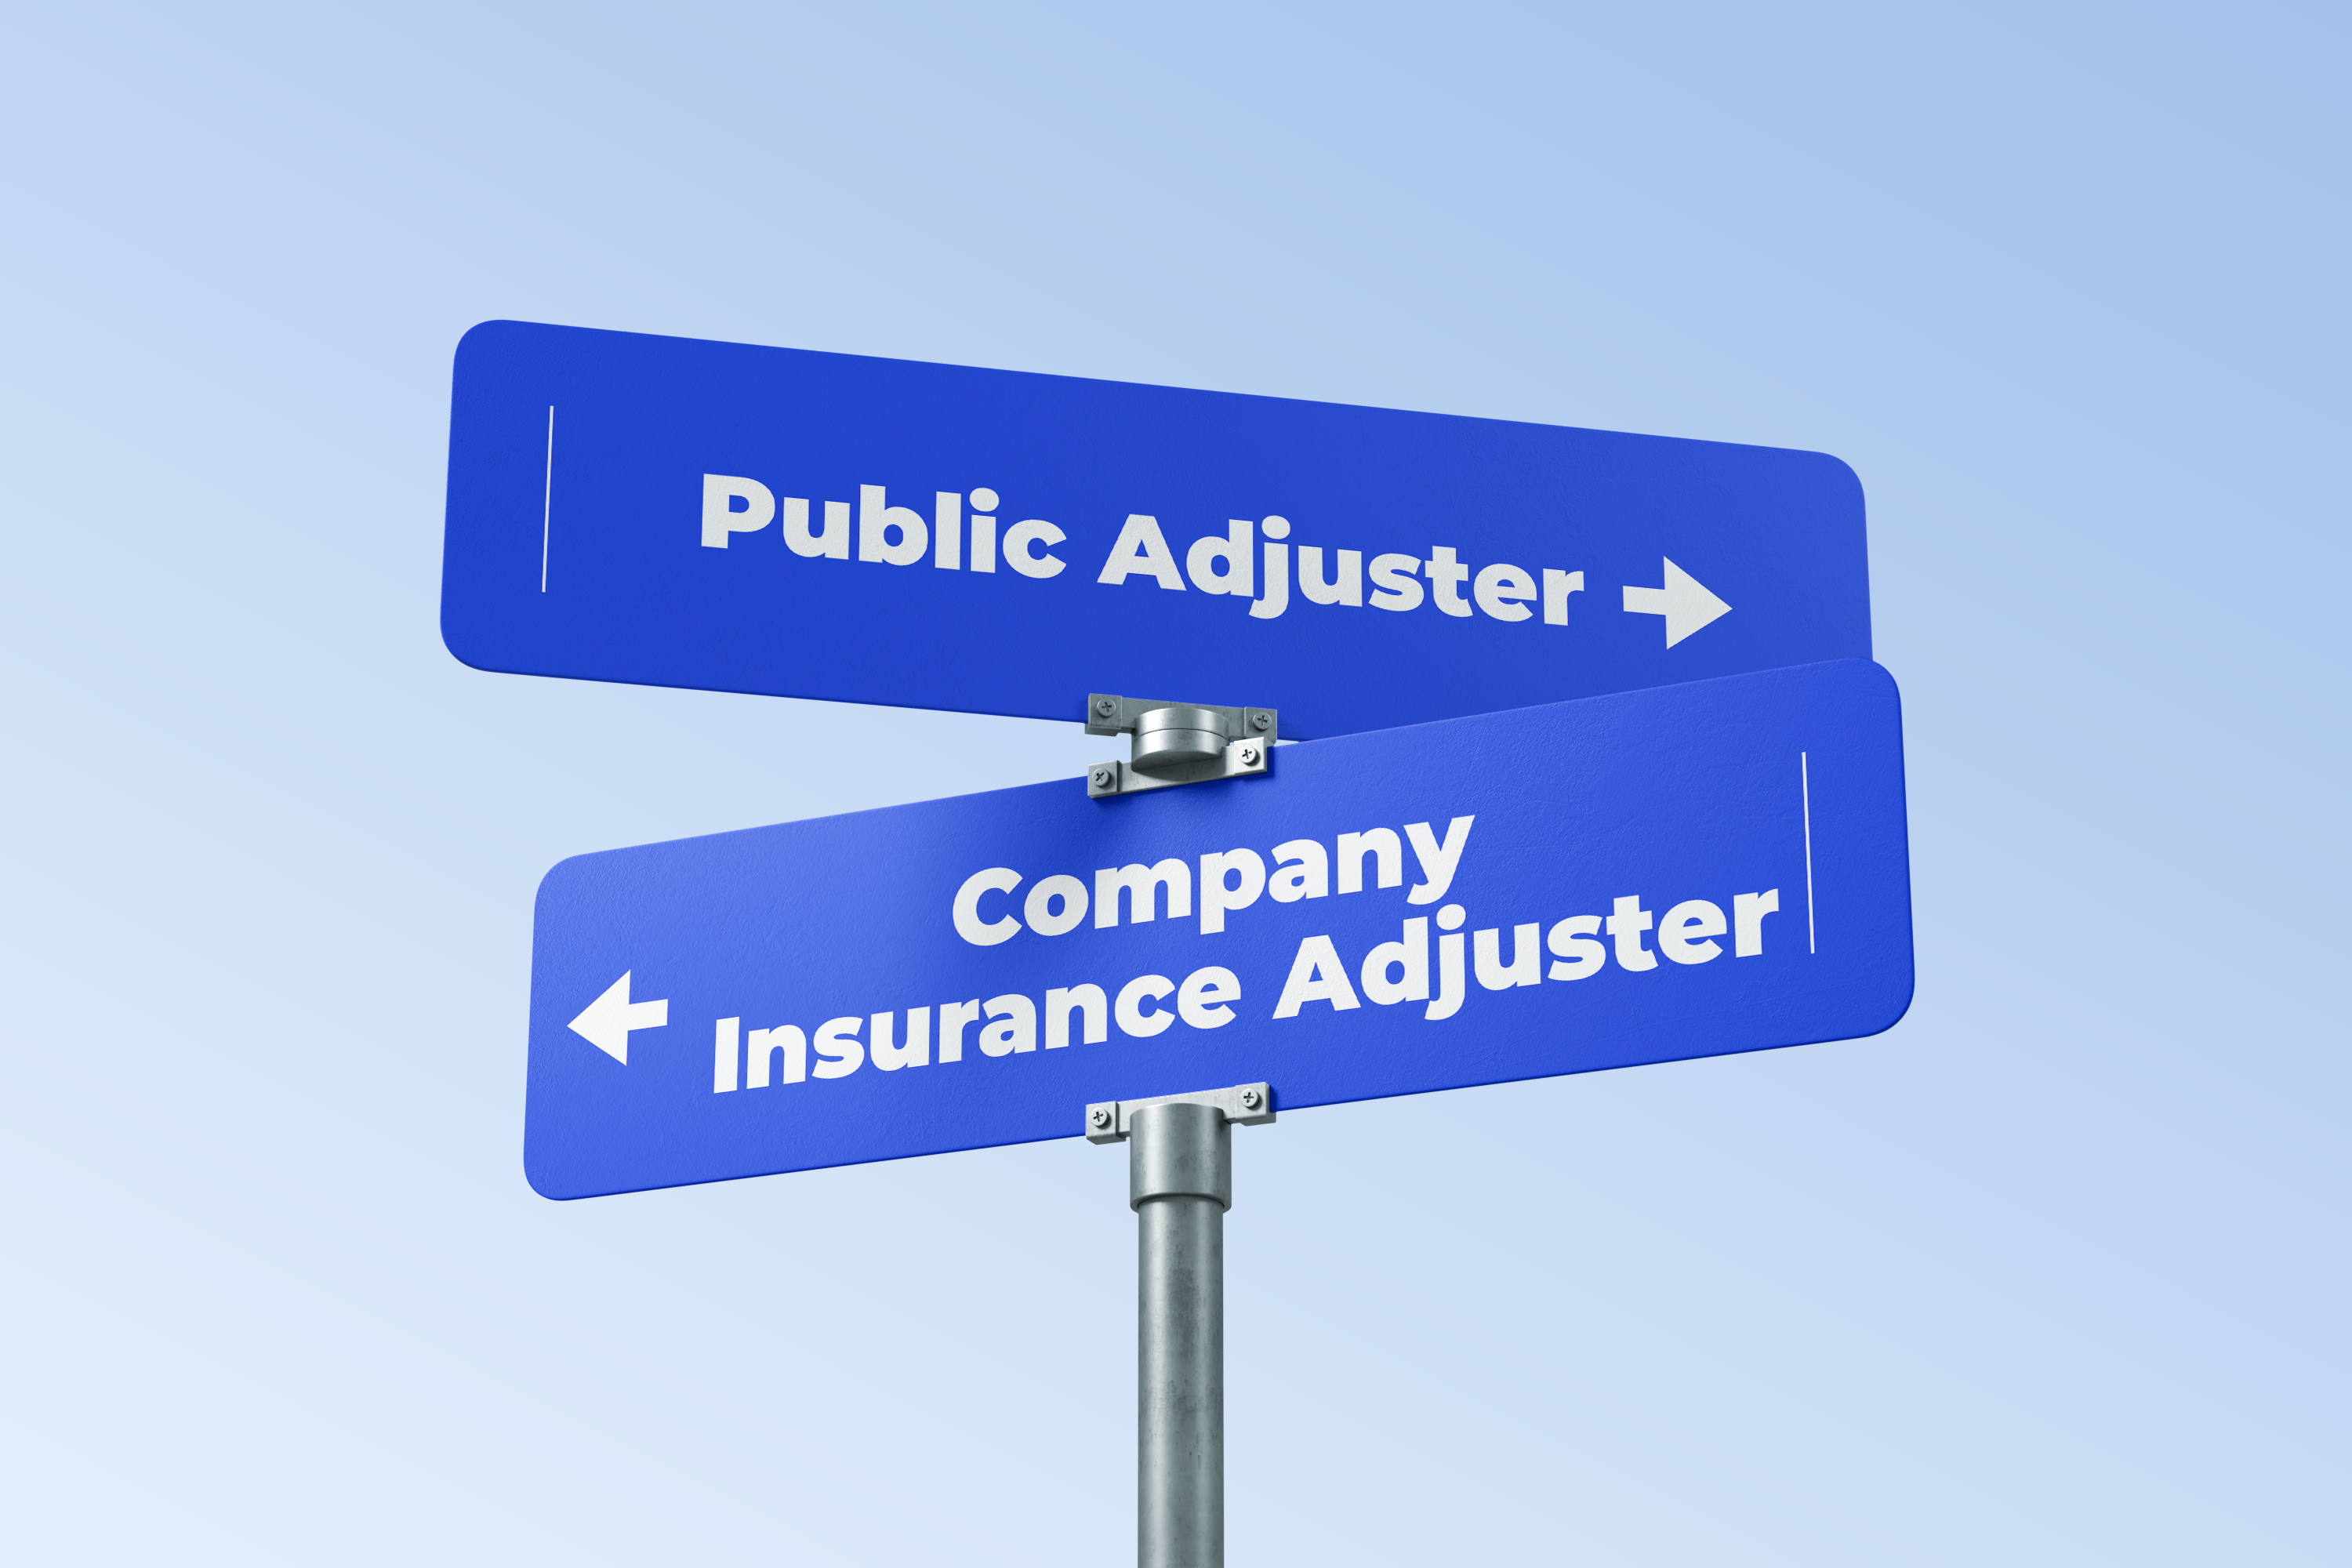 The Difference between Public Adjuster versus Company Insurance Adjuster